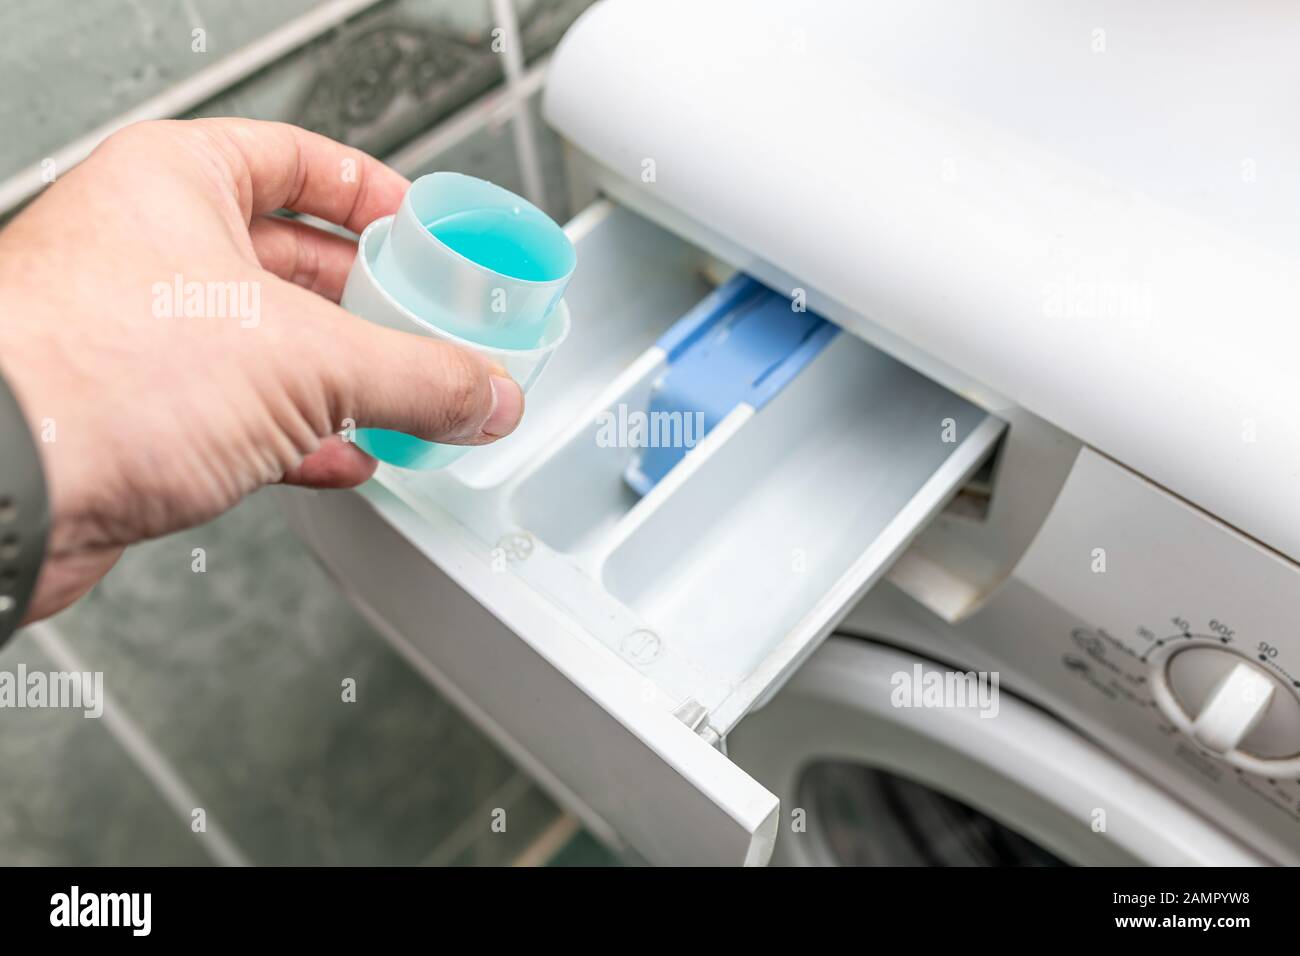 Male hand pouring laundry detergent into washing machine before doing the laundry Stock Photo